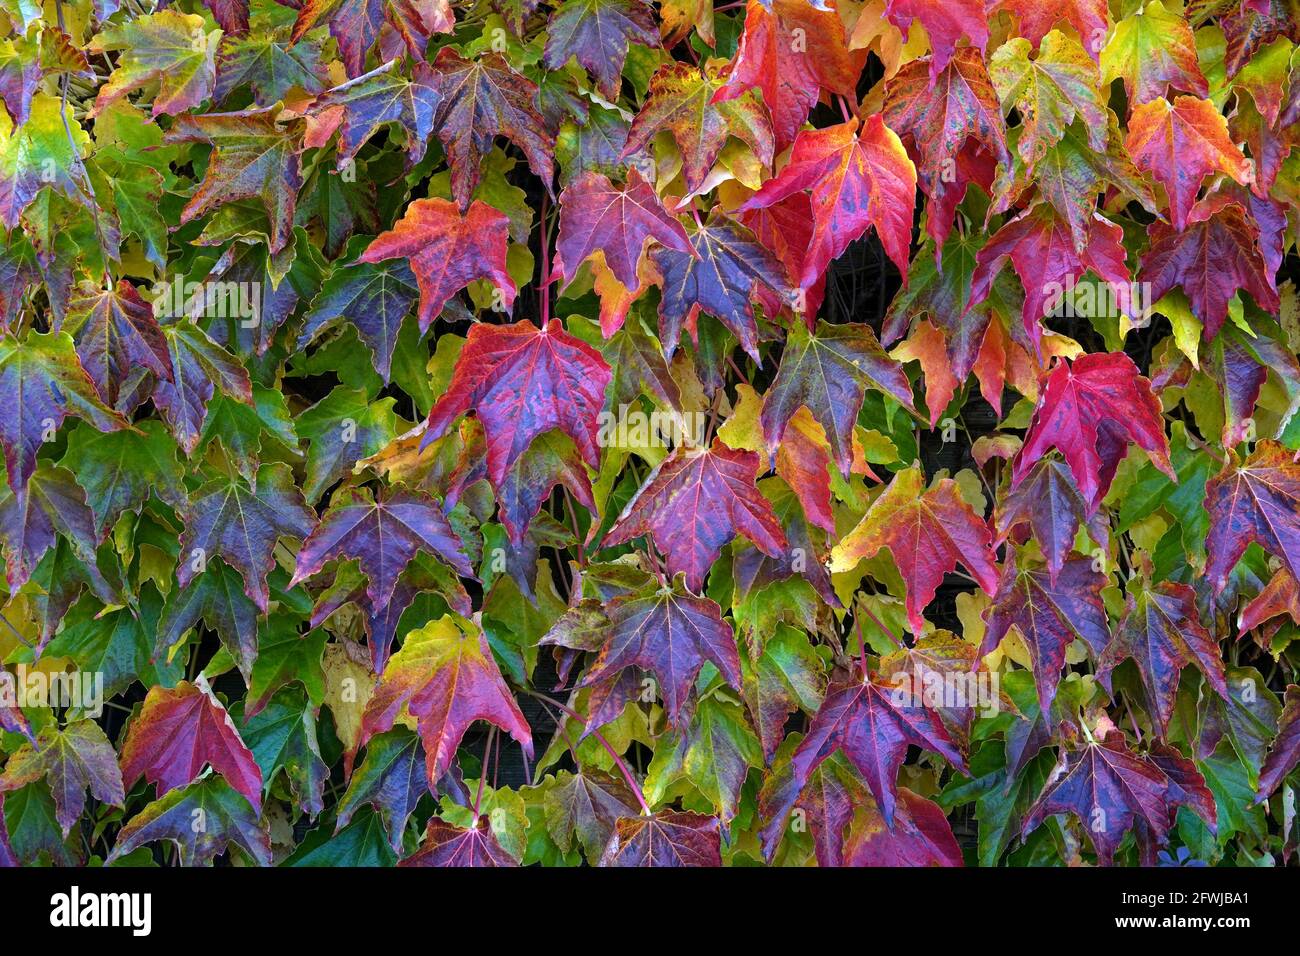 Boston ivy, in Latin called Parthenocissus tricuspidata, with colorful foliage in autumn. Stock Photo